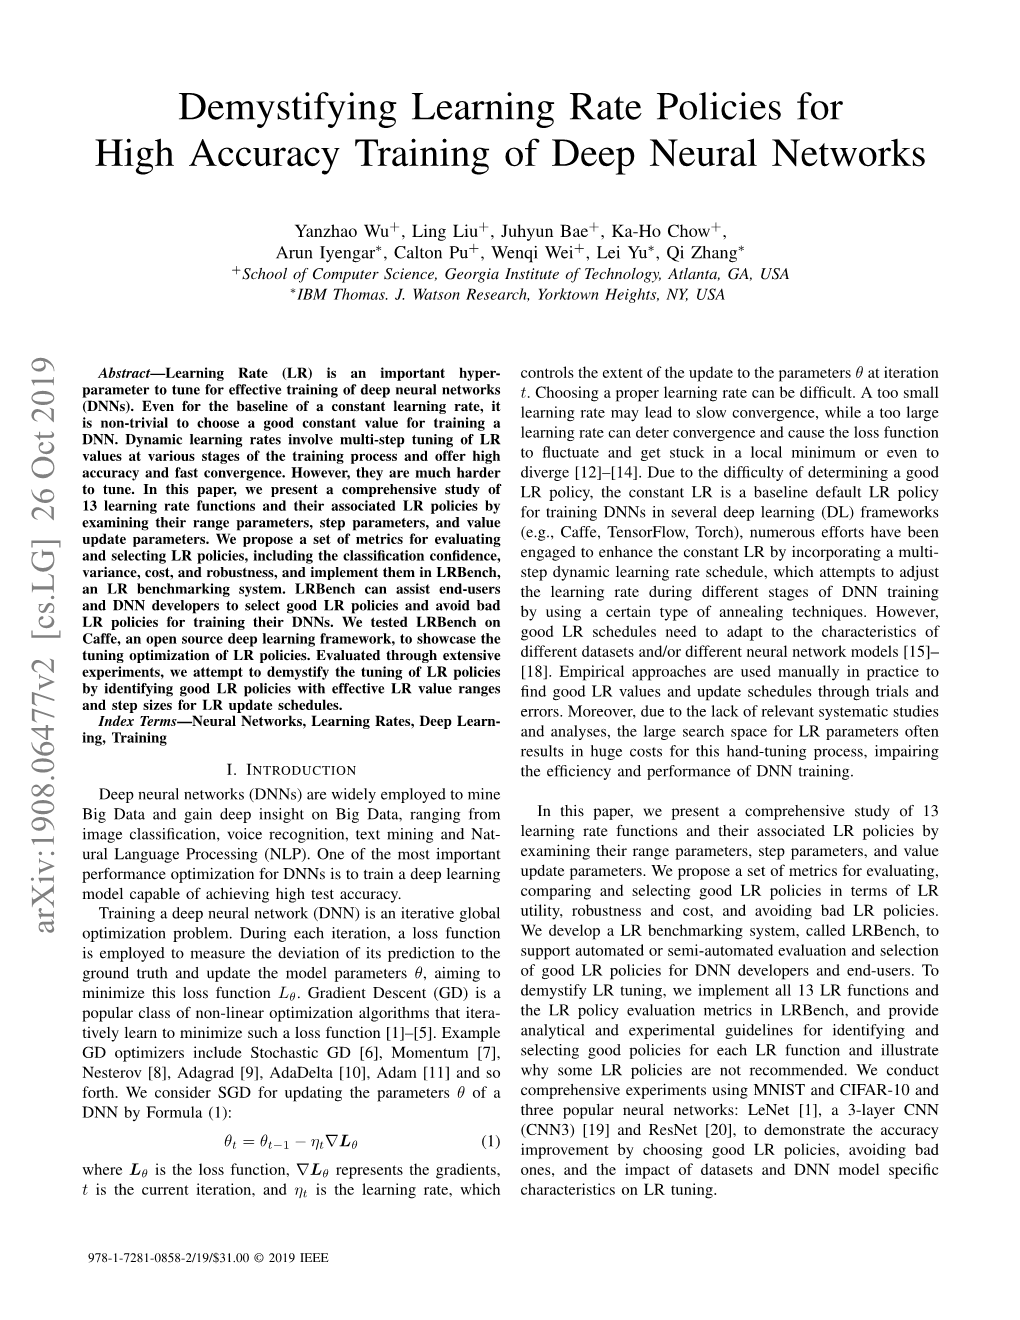 Demystifying Learning Rate Policies for High Accuracy Training of Deep Neural Networks